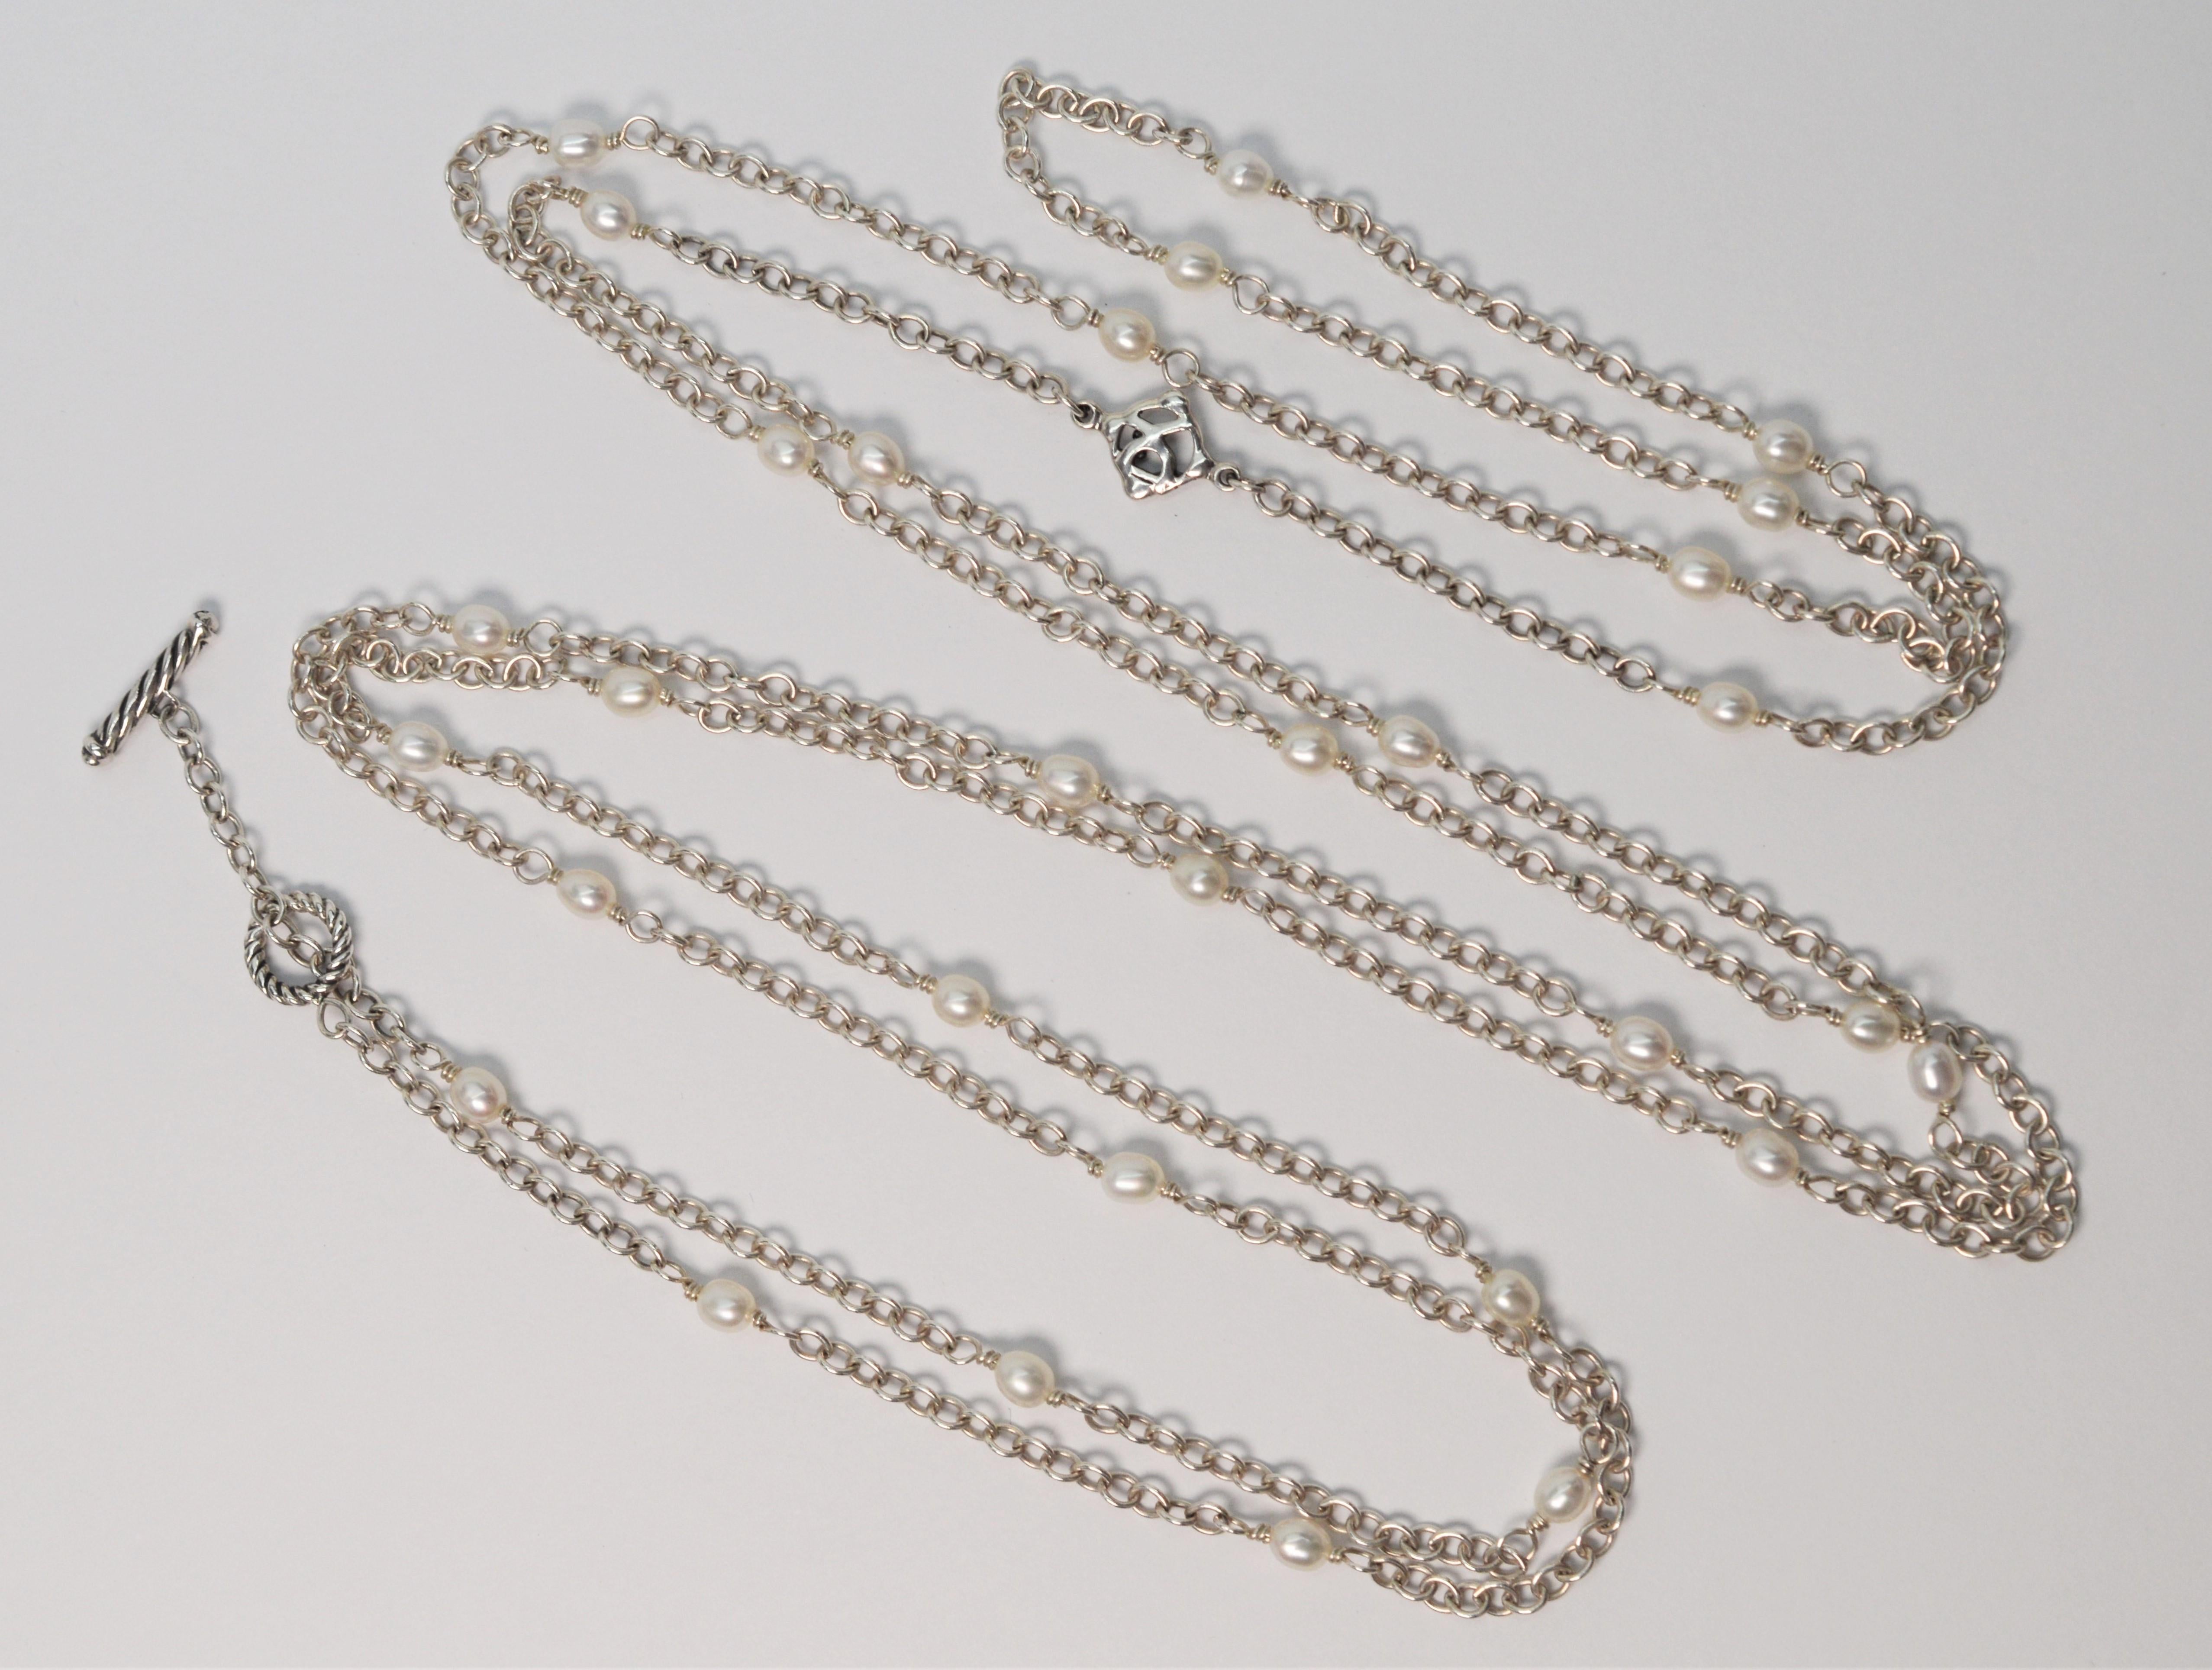 Long in length with plenty of style, this hard to find 64 inch sterling silver David Yurman Chain necklace is a necessary wardrobe staple. From the DY Cable Collection, the generous length of this Continuance Chain allows for perfect draping or